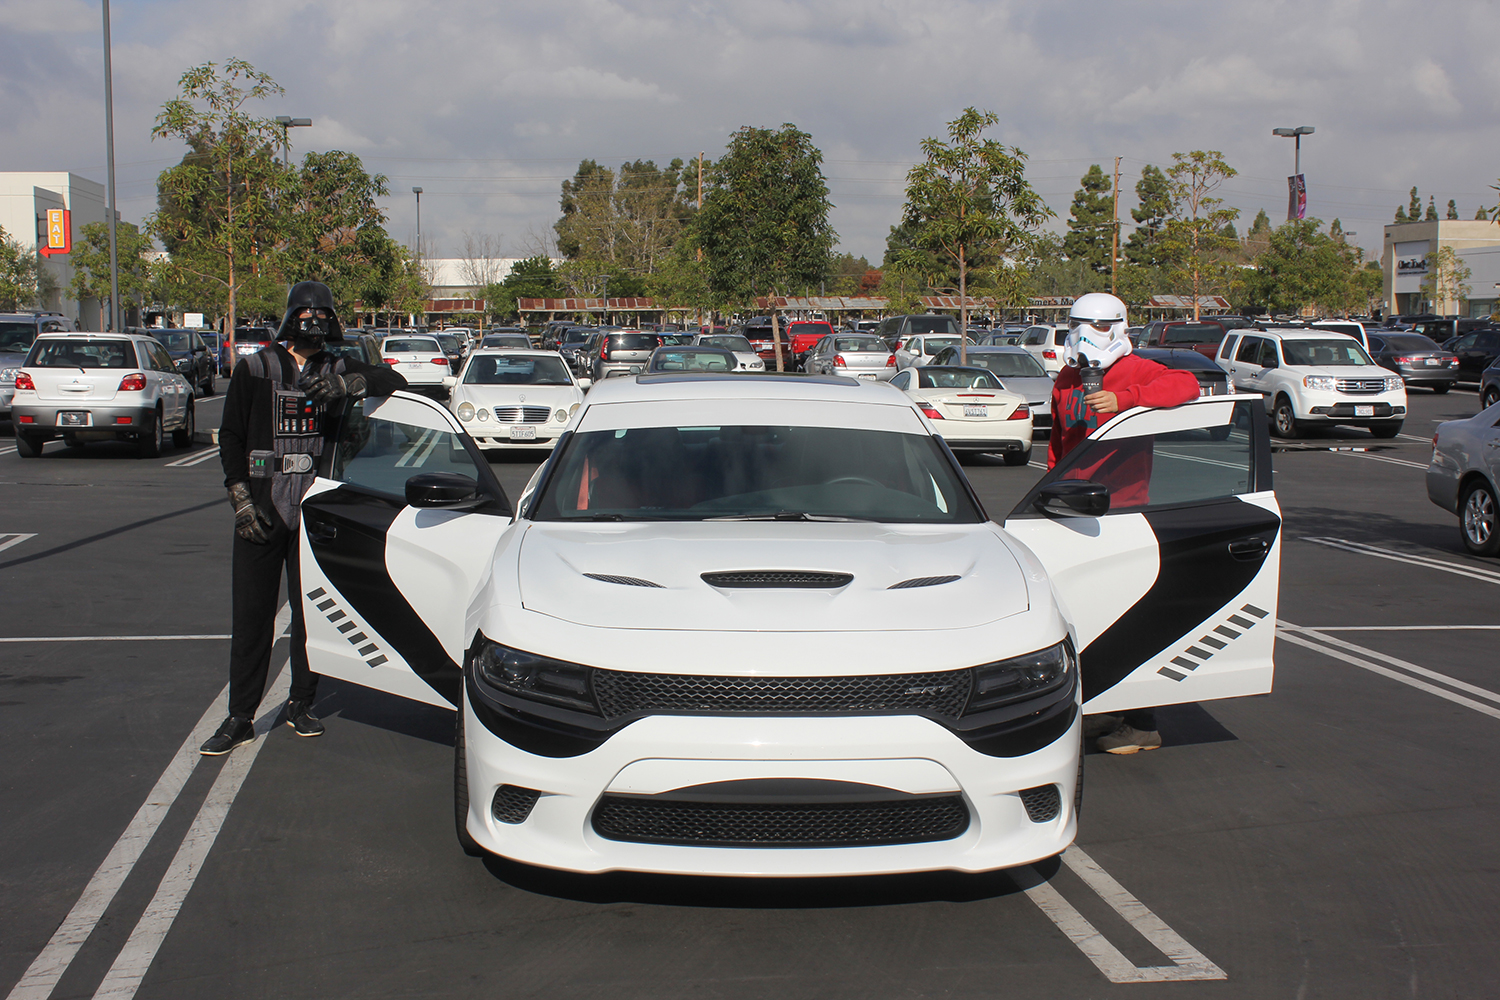 stormtroopers day off putting the galaxy on hold to enjoy dodges charger srt hellcat dodge stormtrooper 0783